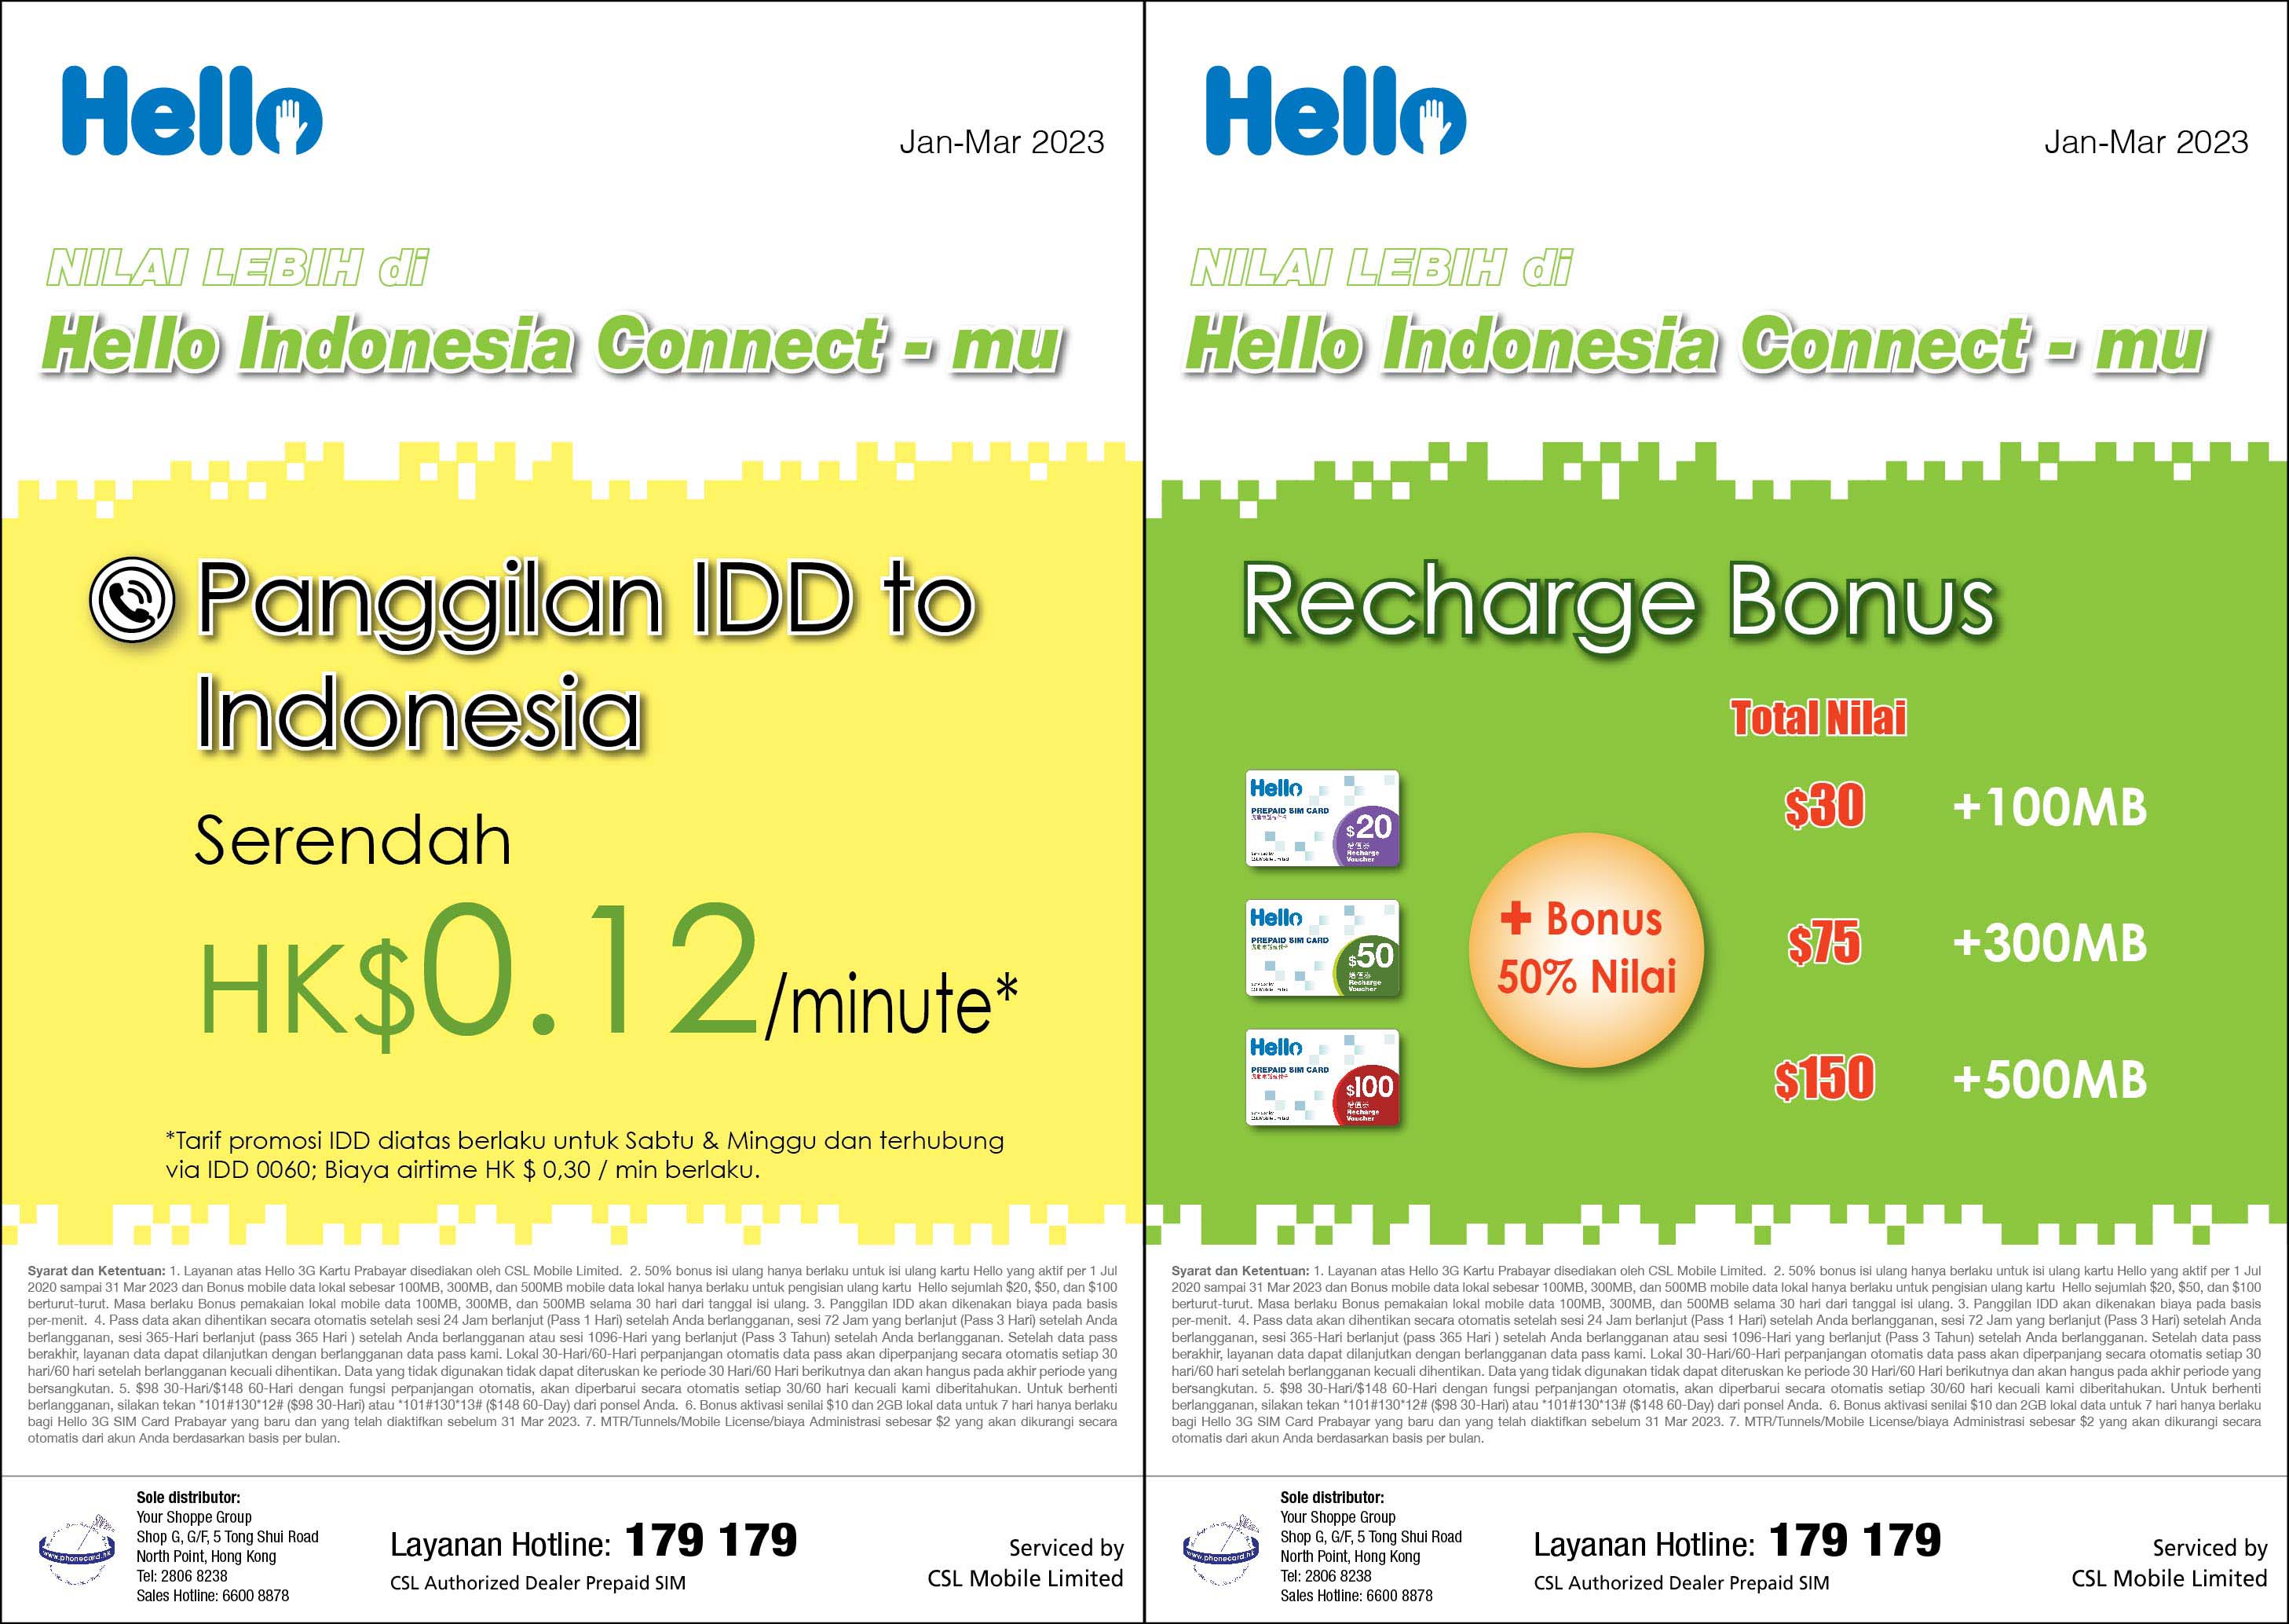 Hello-3G-Indonesia-Connect-2016